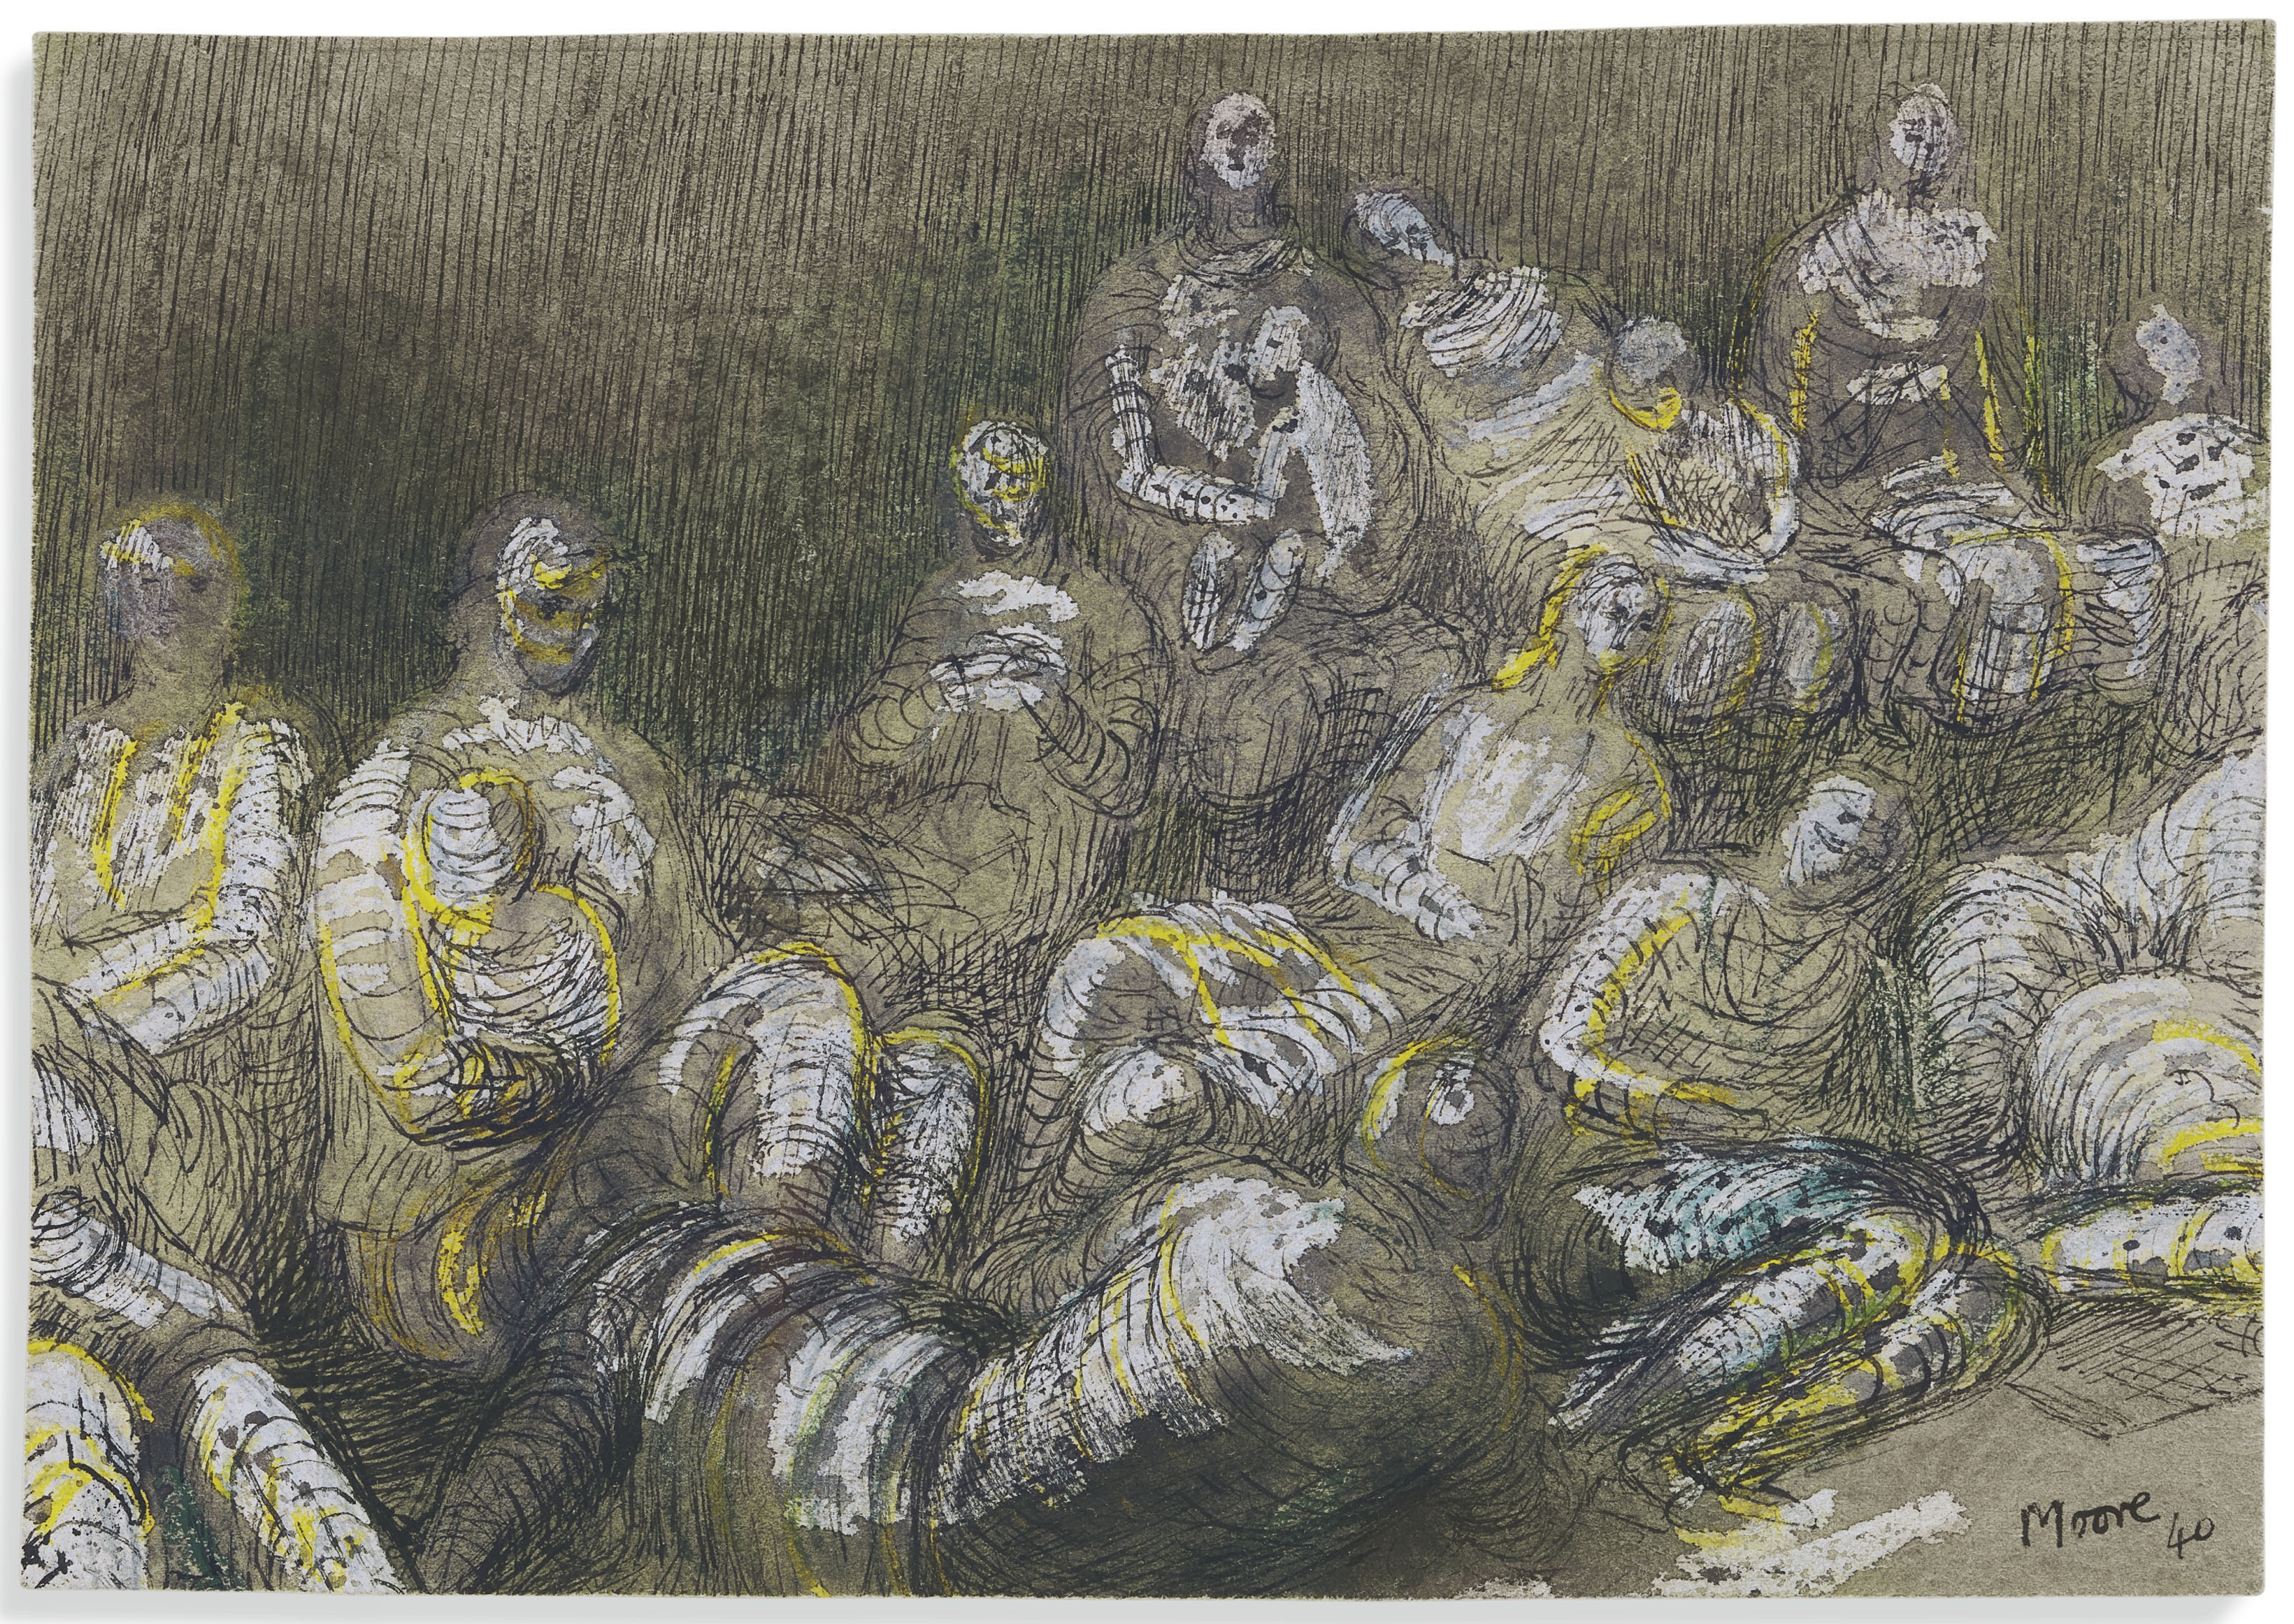 Shelter Drawing: Underground Study by Henry Moore, 1940